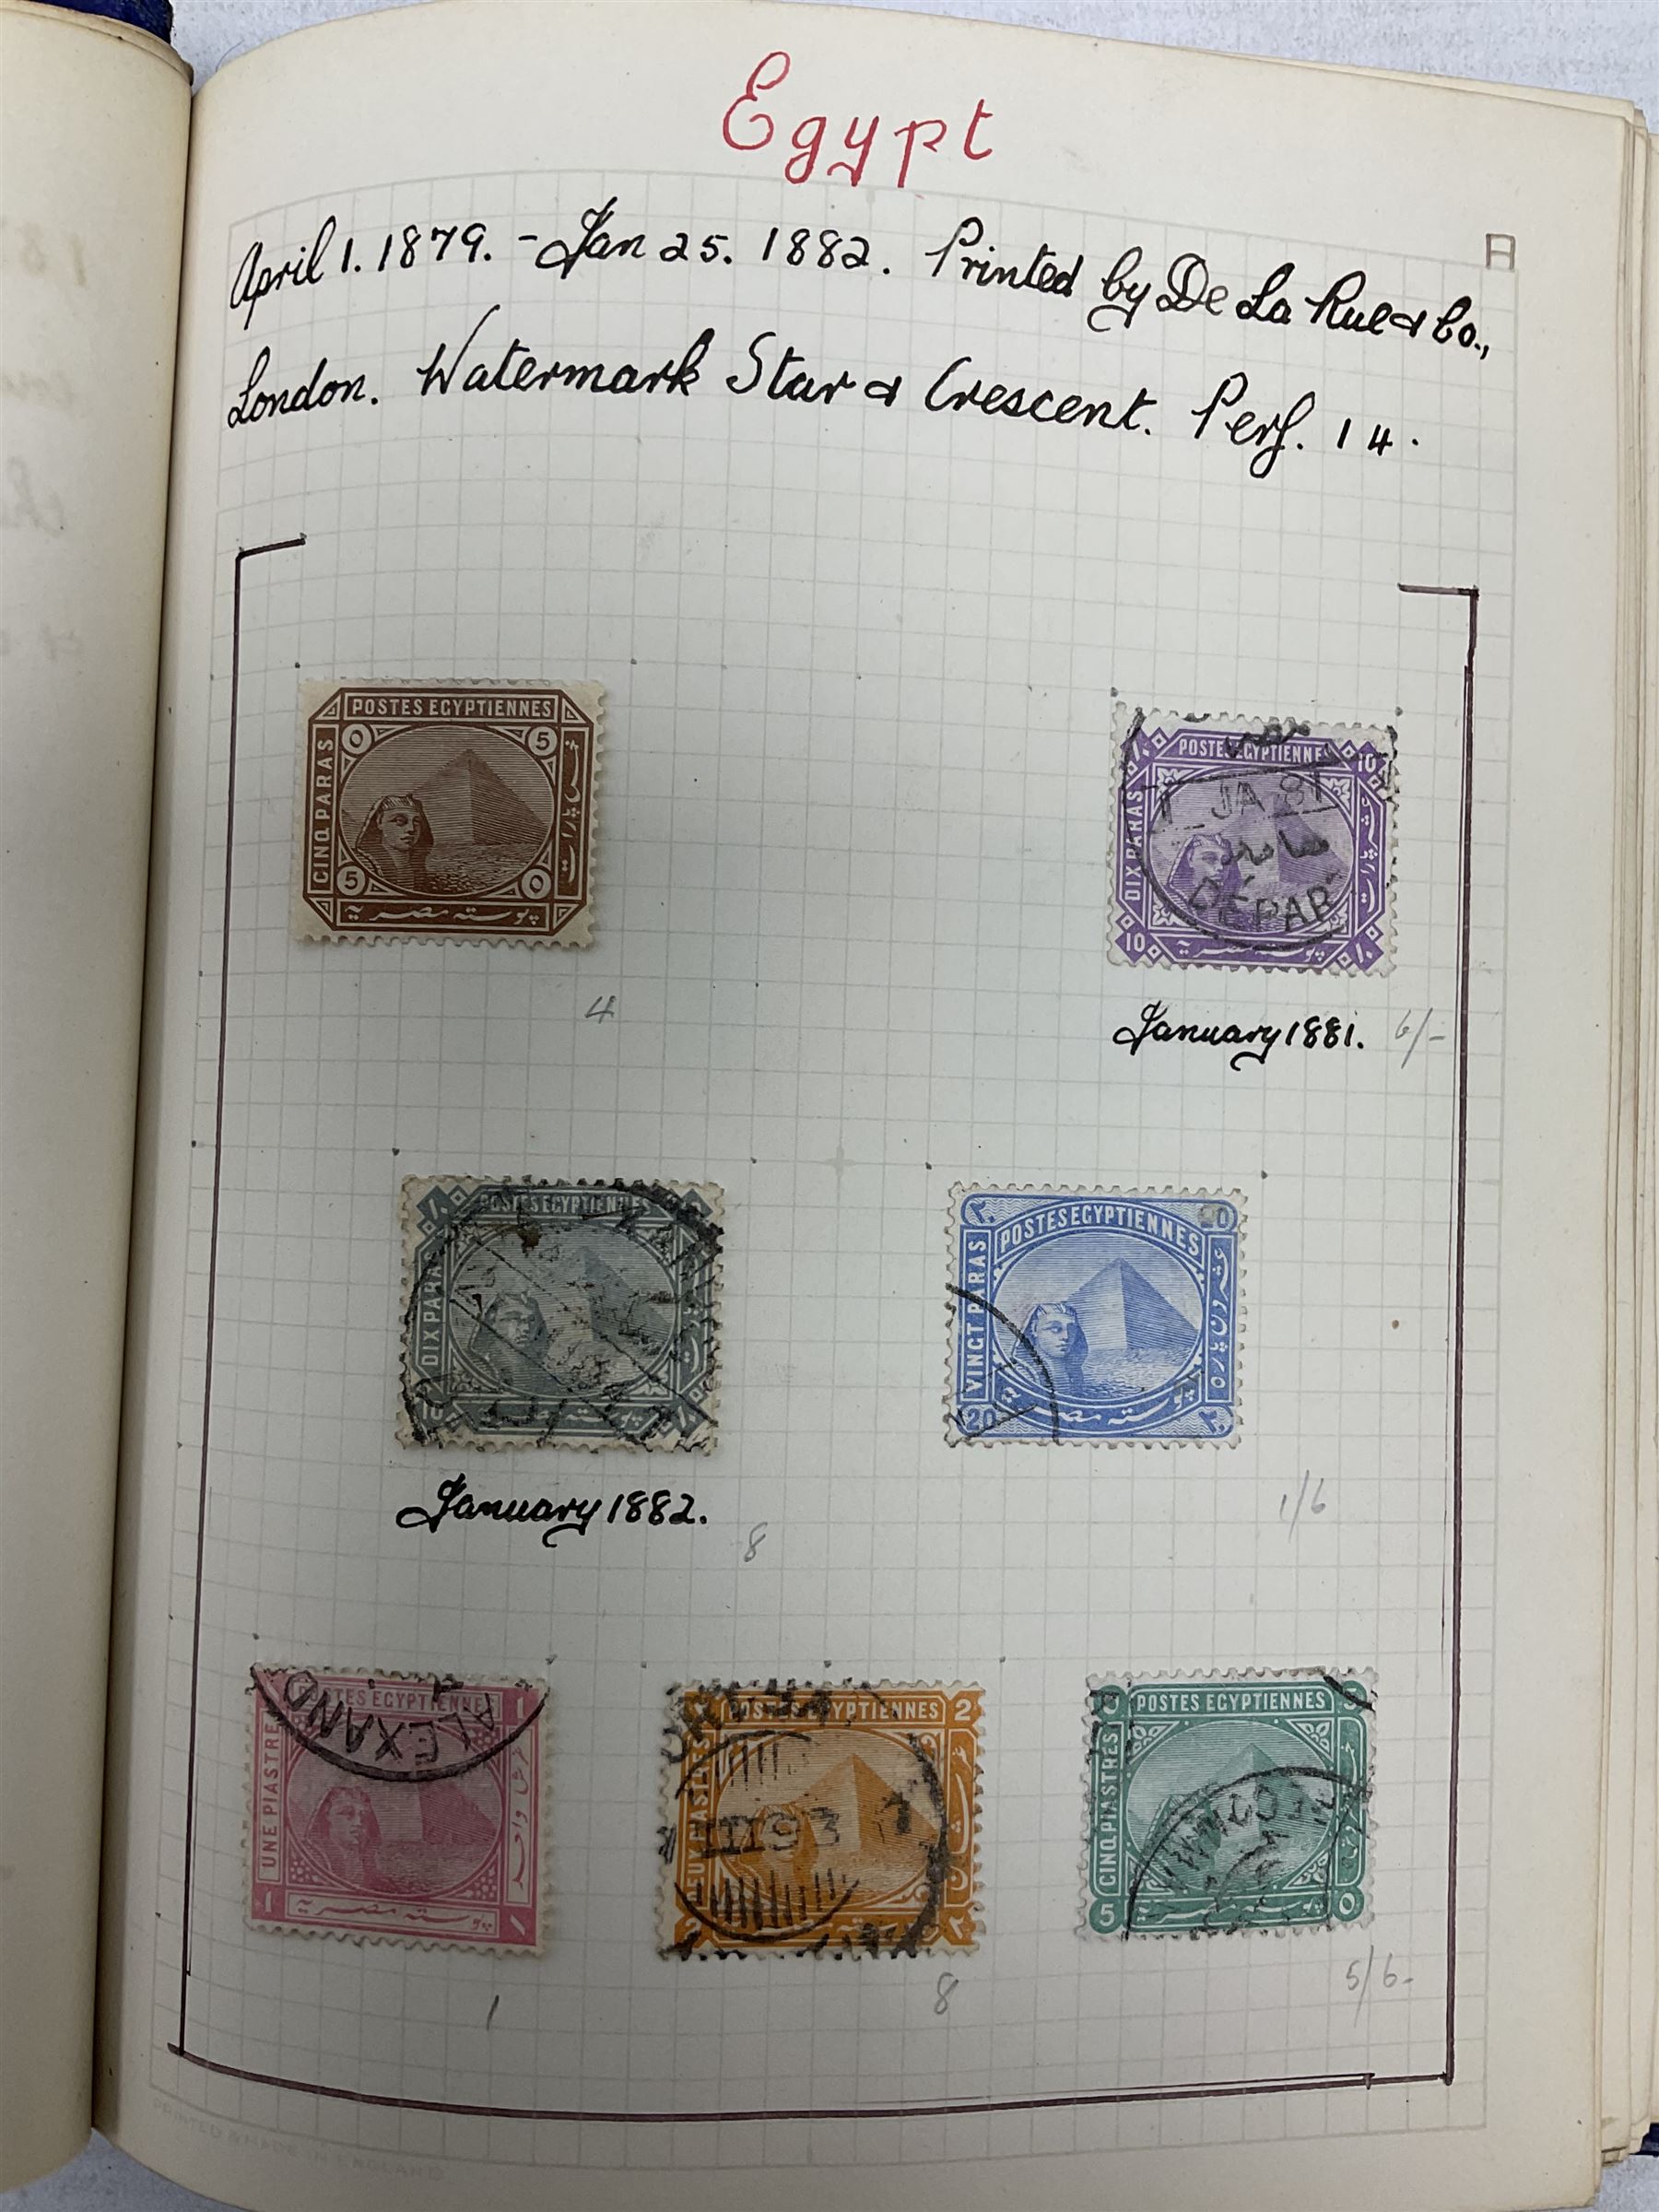 Egypt 1866 and later stamps - Image 85 of 761